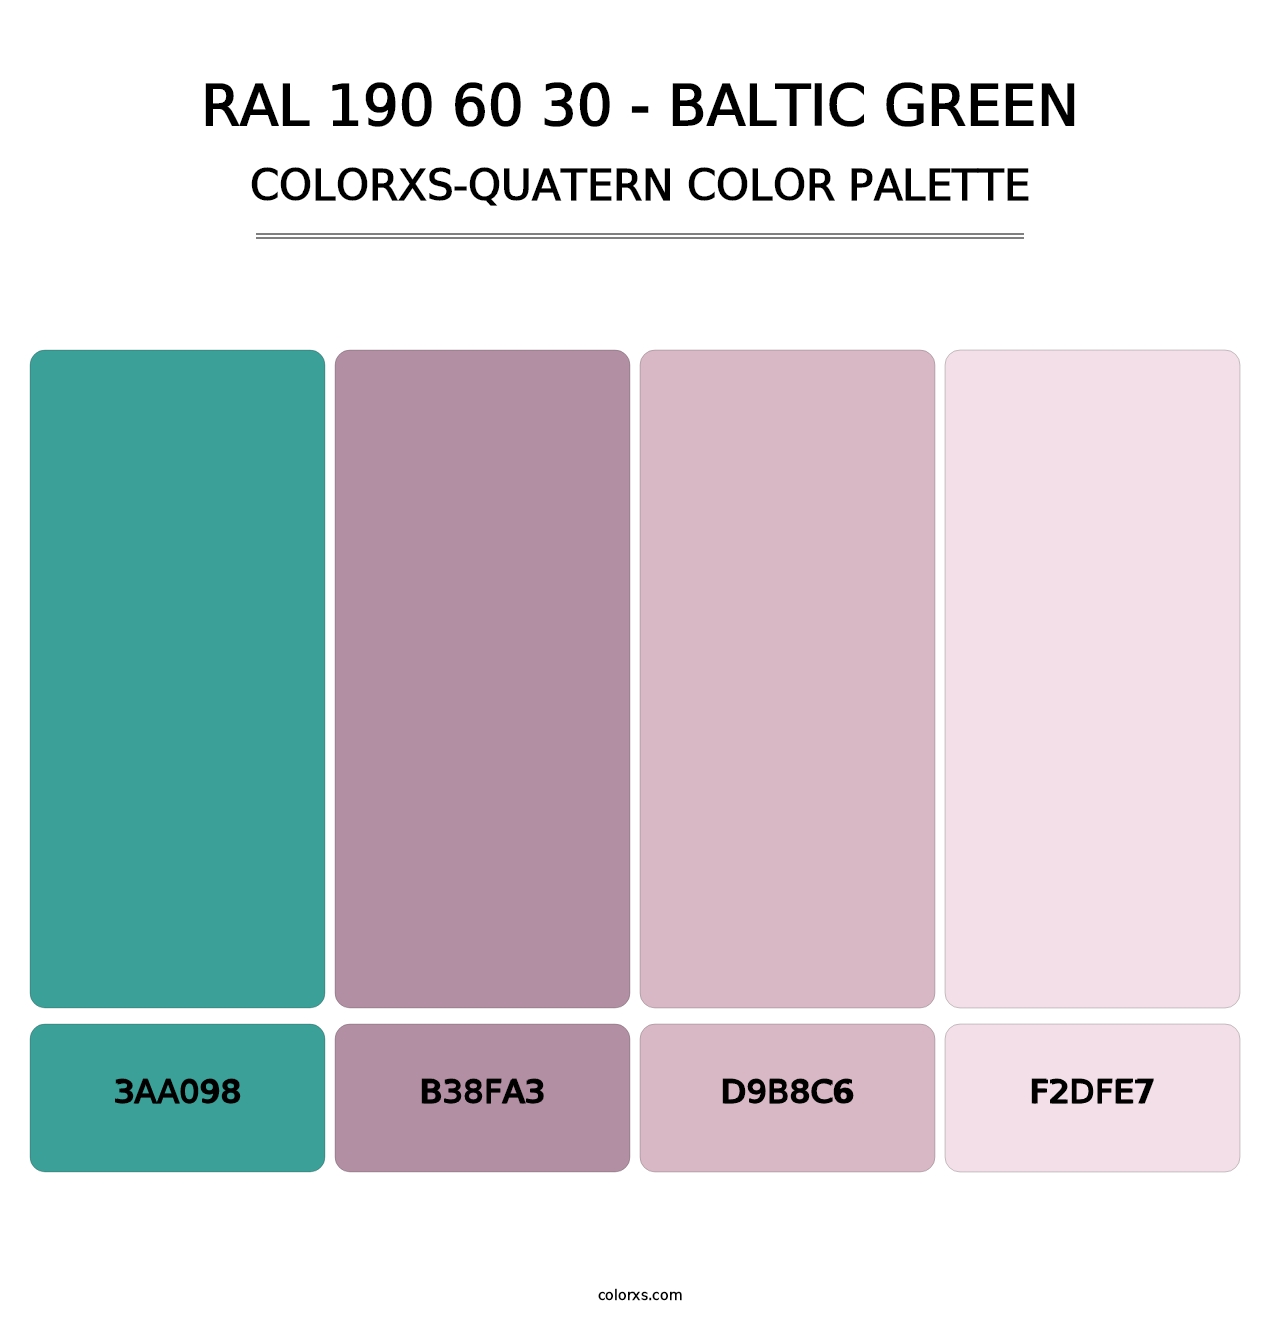 RAL 190 60 30 - Baltic Green - Colorxs Quatern Palette